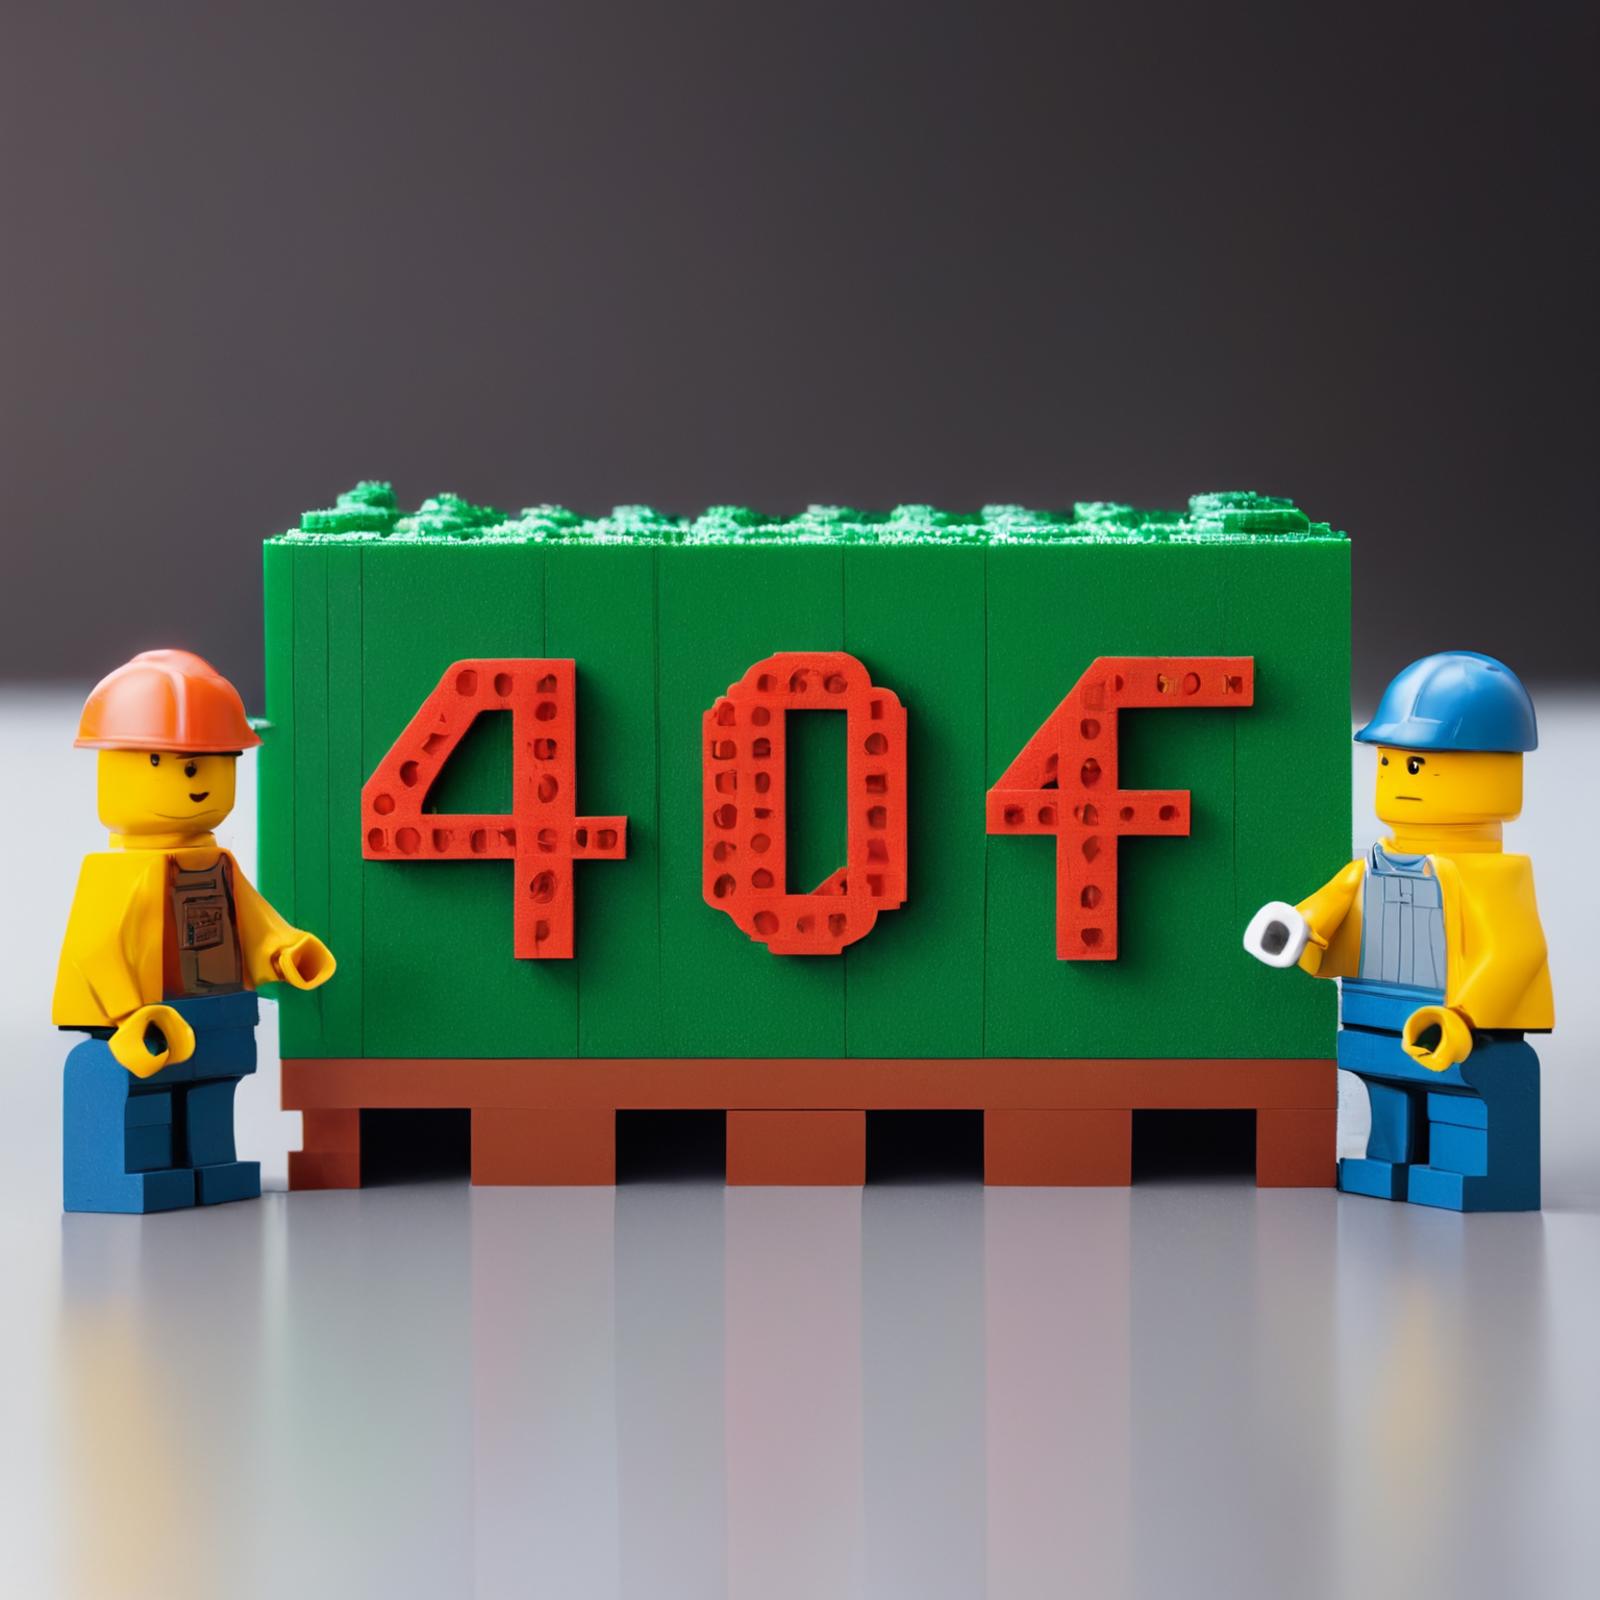 Two Lego Minifigures Standing in Front of a Green 404 Sign